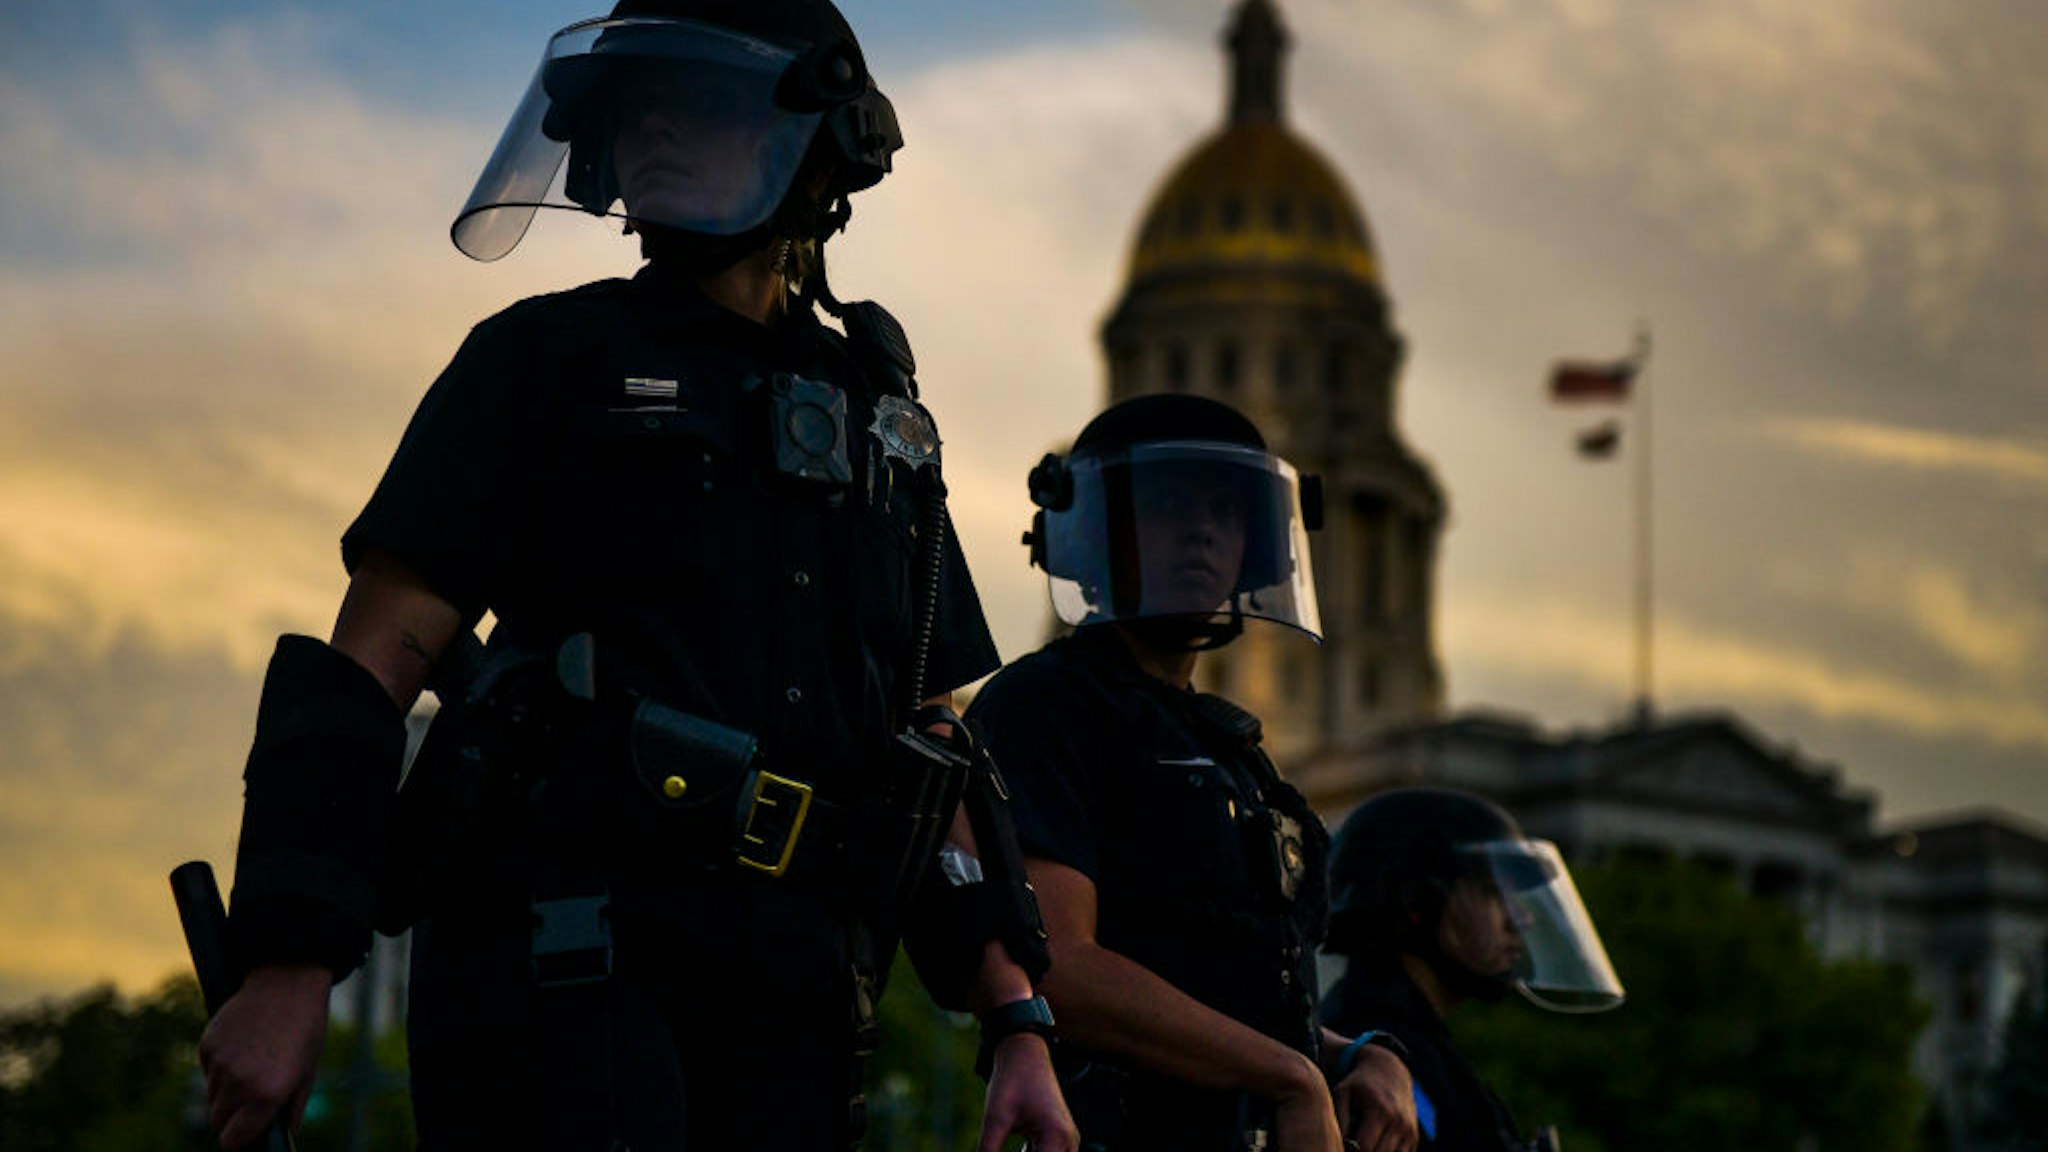 DENVER, CO - MAY 29: Police officers watch over a crowd of people near the Colorado state capitol during a protest on May 29, 2020 in Denver, Colorado. This was the second day of protests in Denver, with more demonstrations planned for the weekend. Demonstrations are being held across the US after George Floyd died in police custody on May 25th in Minneapolis, Minnesota.(Photo by Michael Ciaglo/Getty Images)